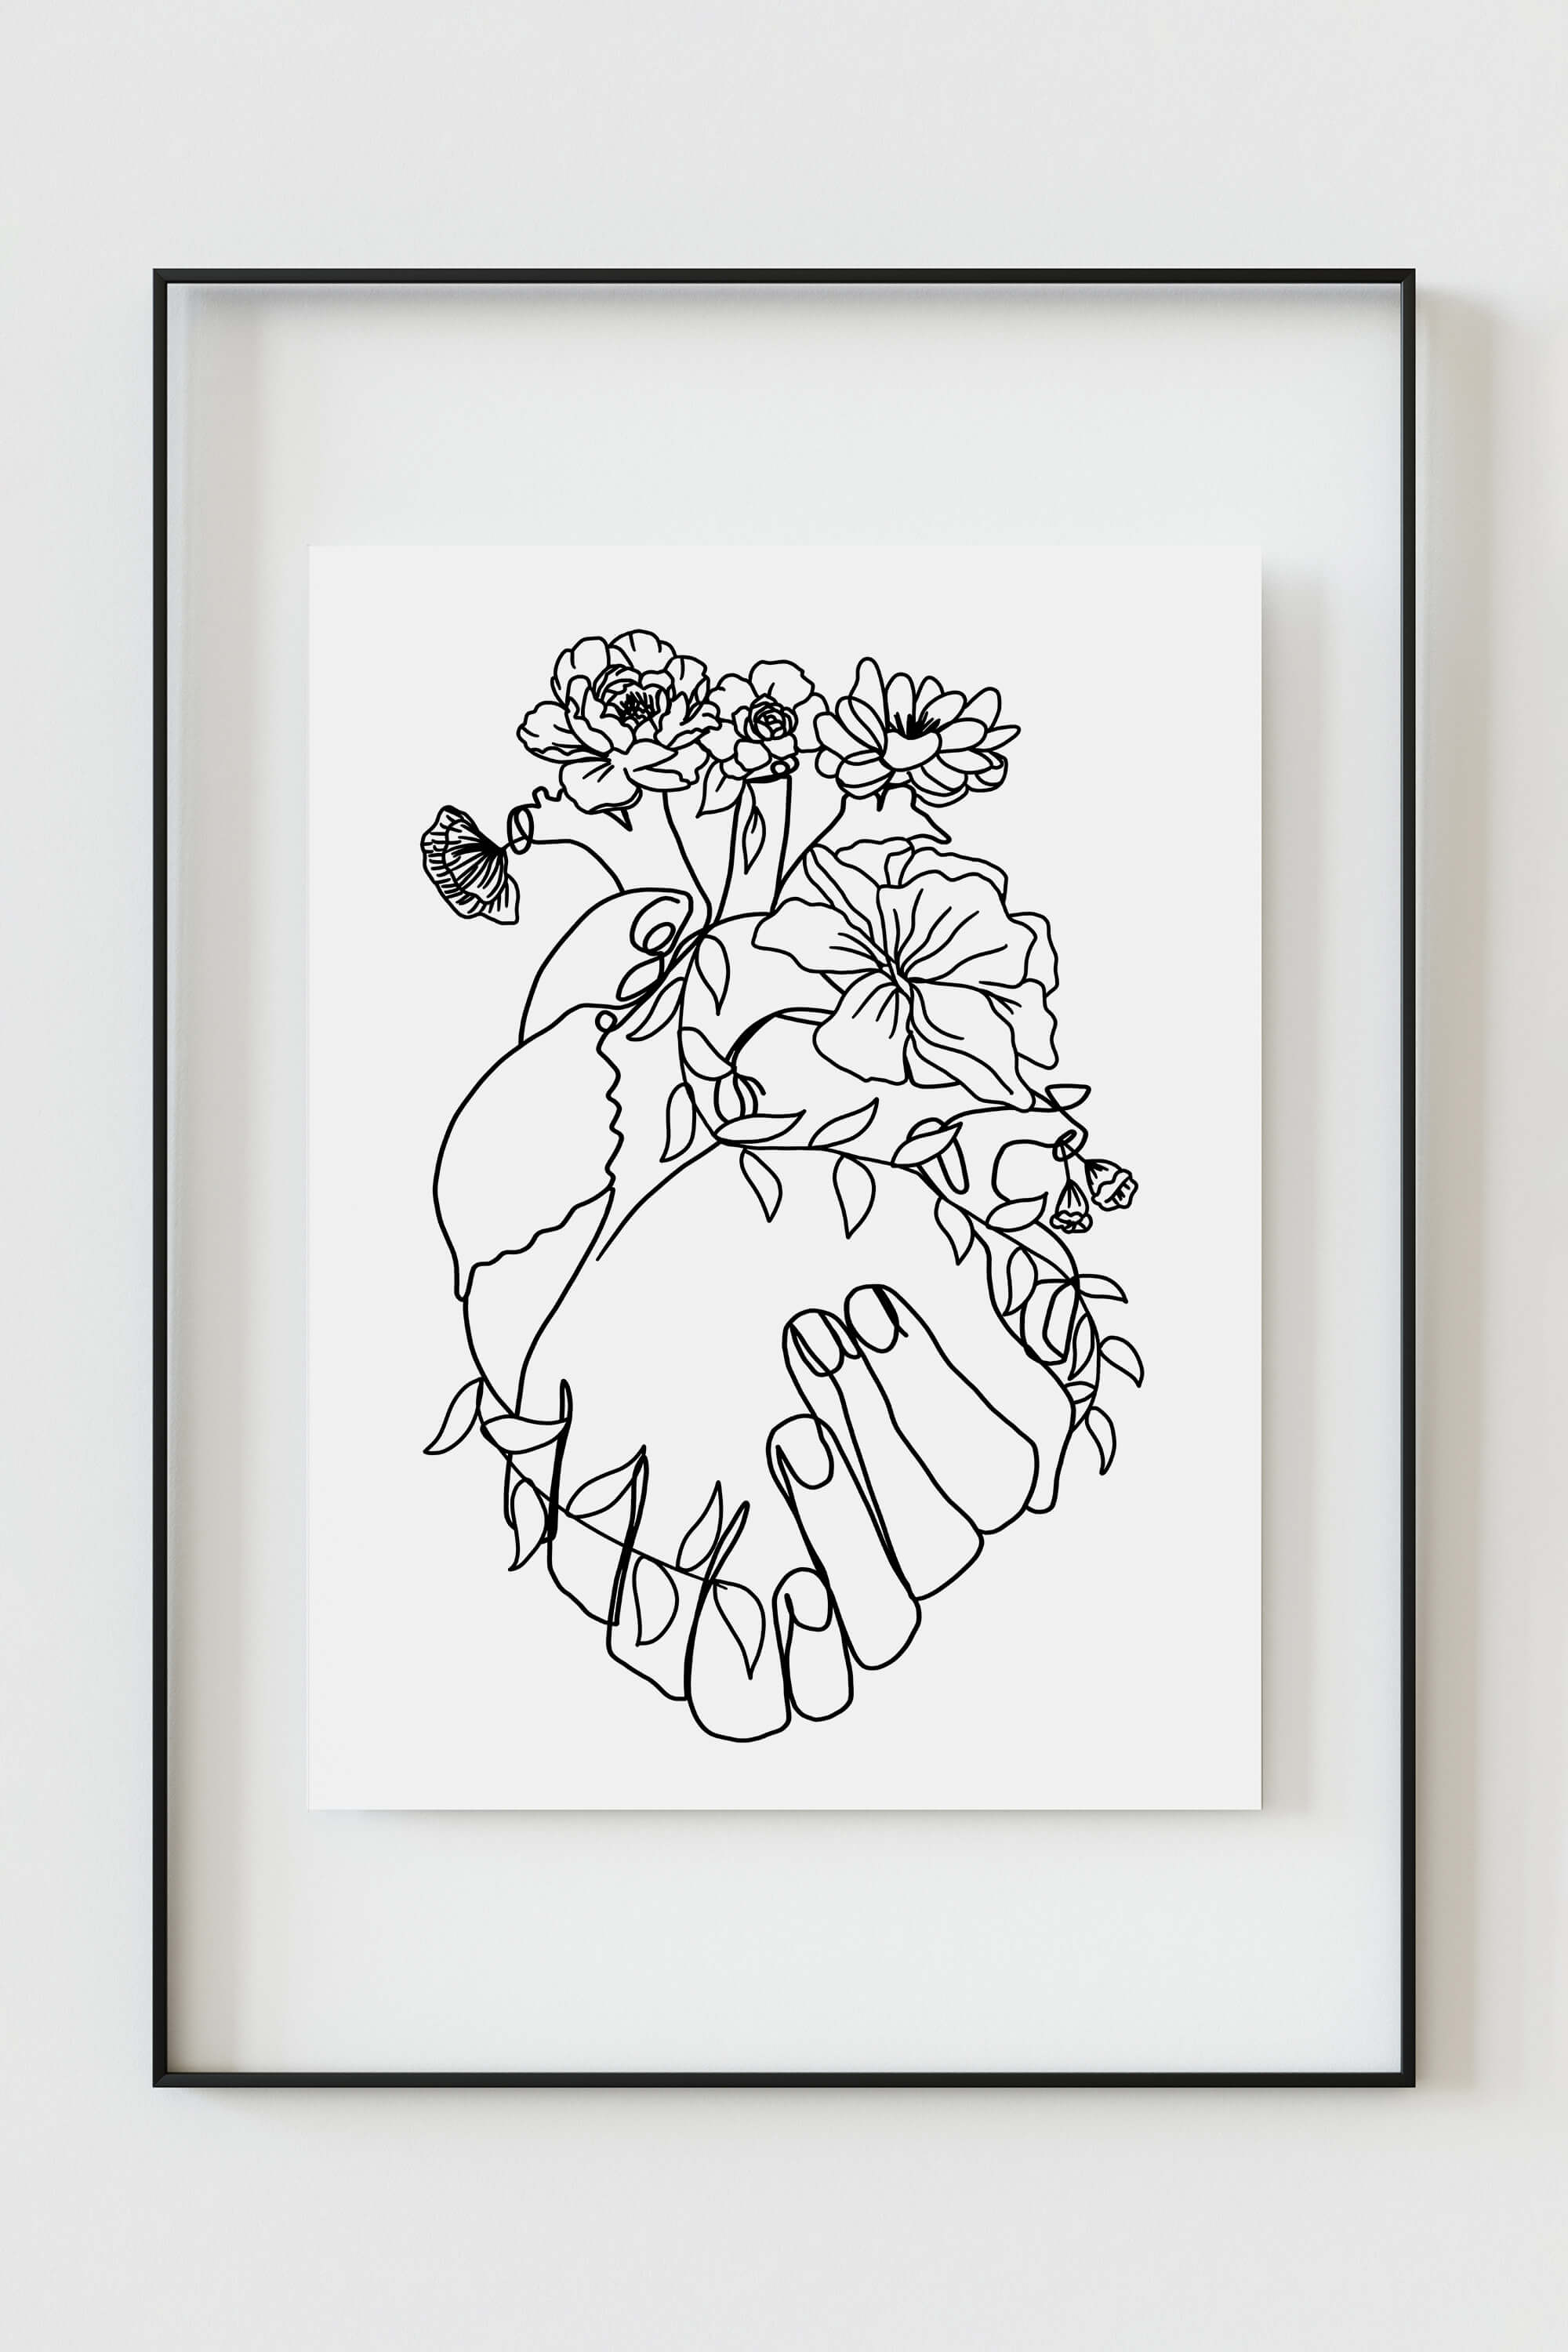 A black and white art print that shows the human heart anatomy with aesthetic flower lines. The print combines organic and geometric shapes and represents the beauty and fragility of life and love.